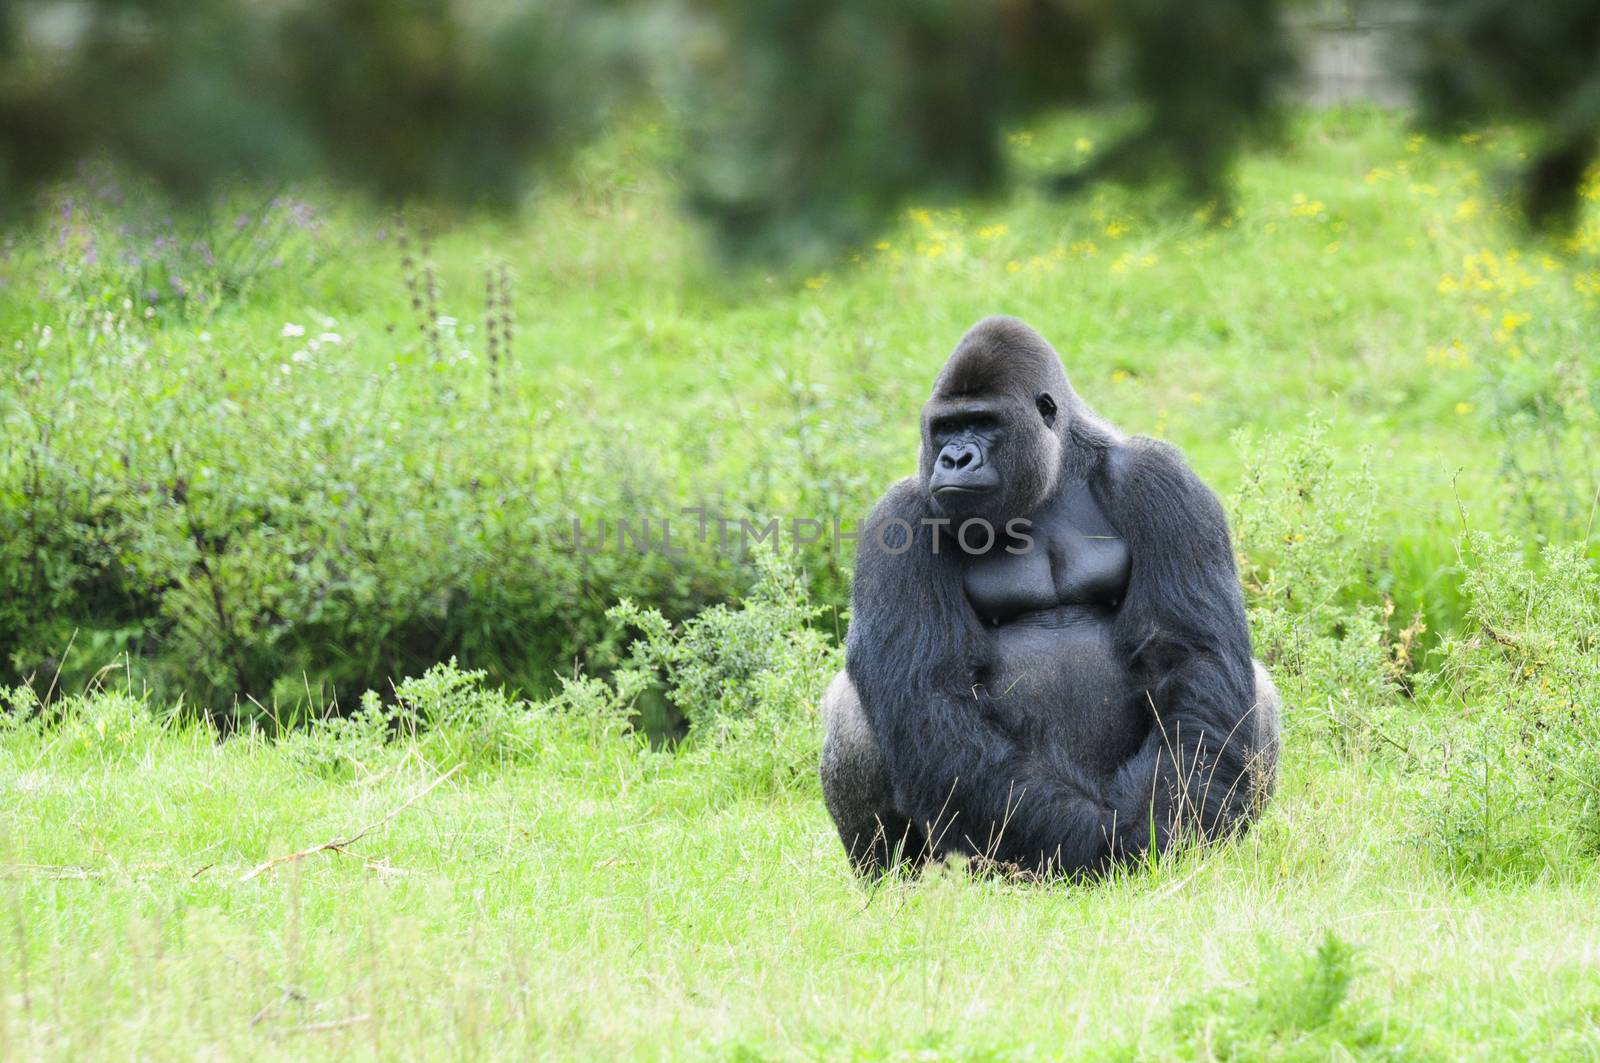 gorilla sits quietly on the grass and looks gloomy